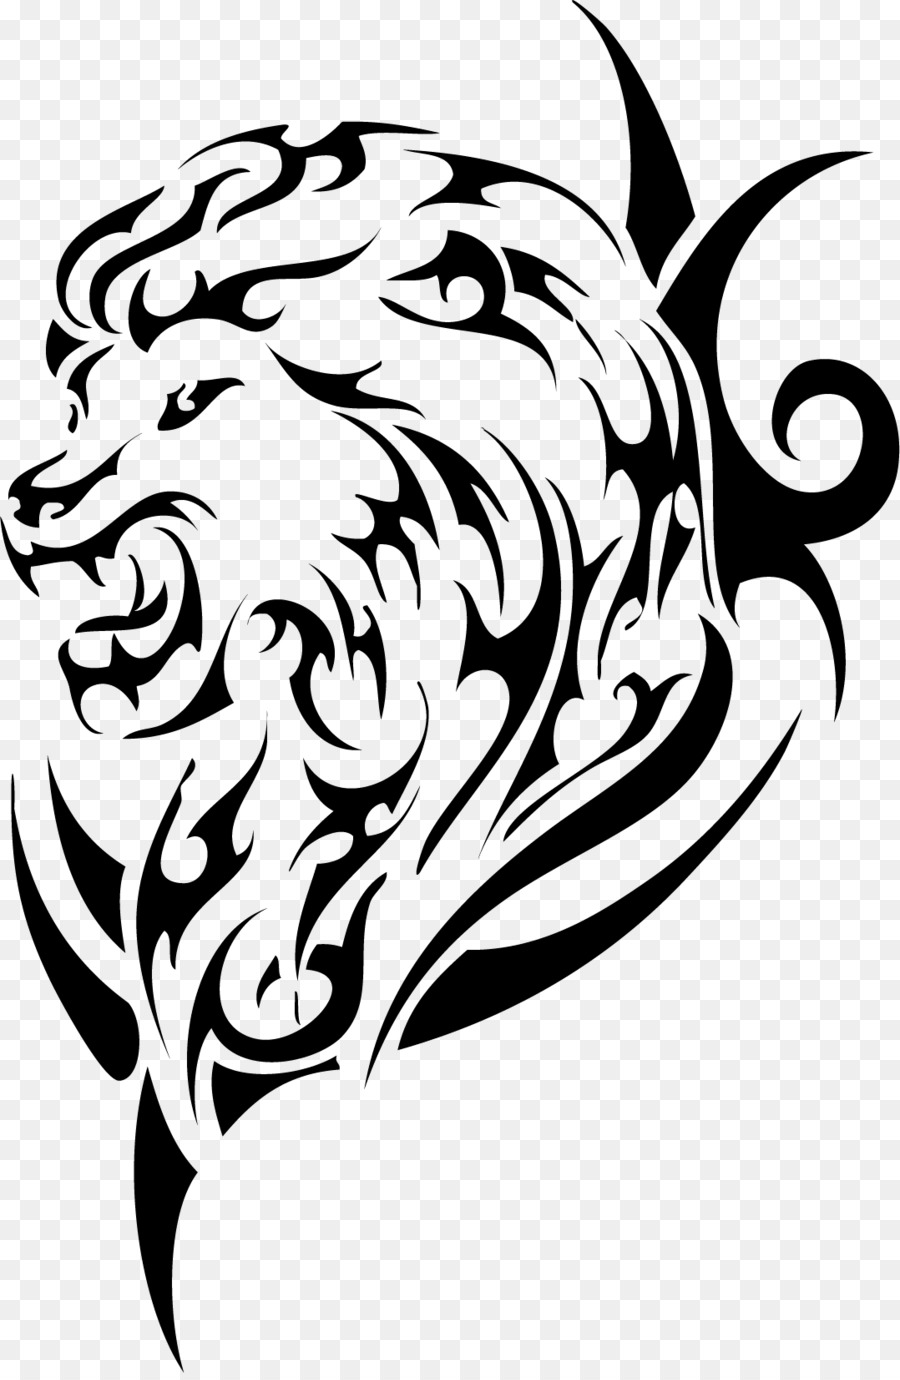 Lion Sleeve tattoo Tribe - Tribal Crown Tattoo png download - 1078*1645 - Free Transparent Lion png Download.